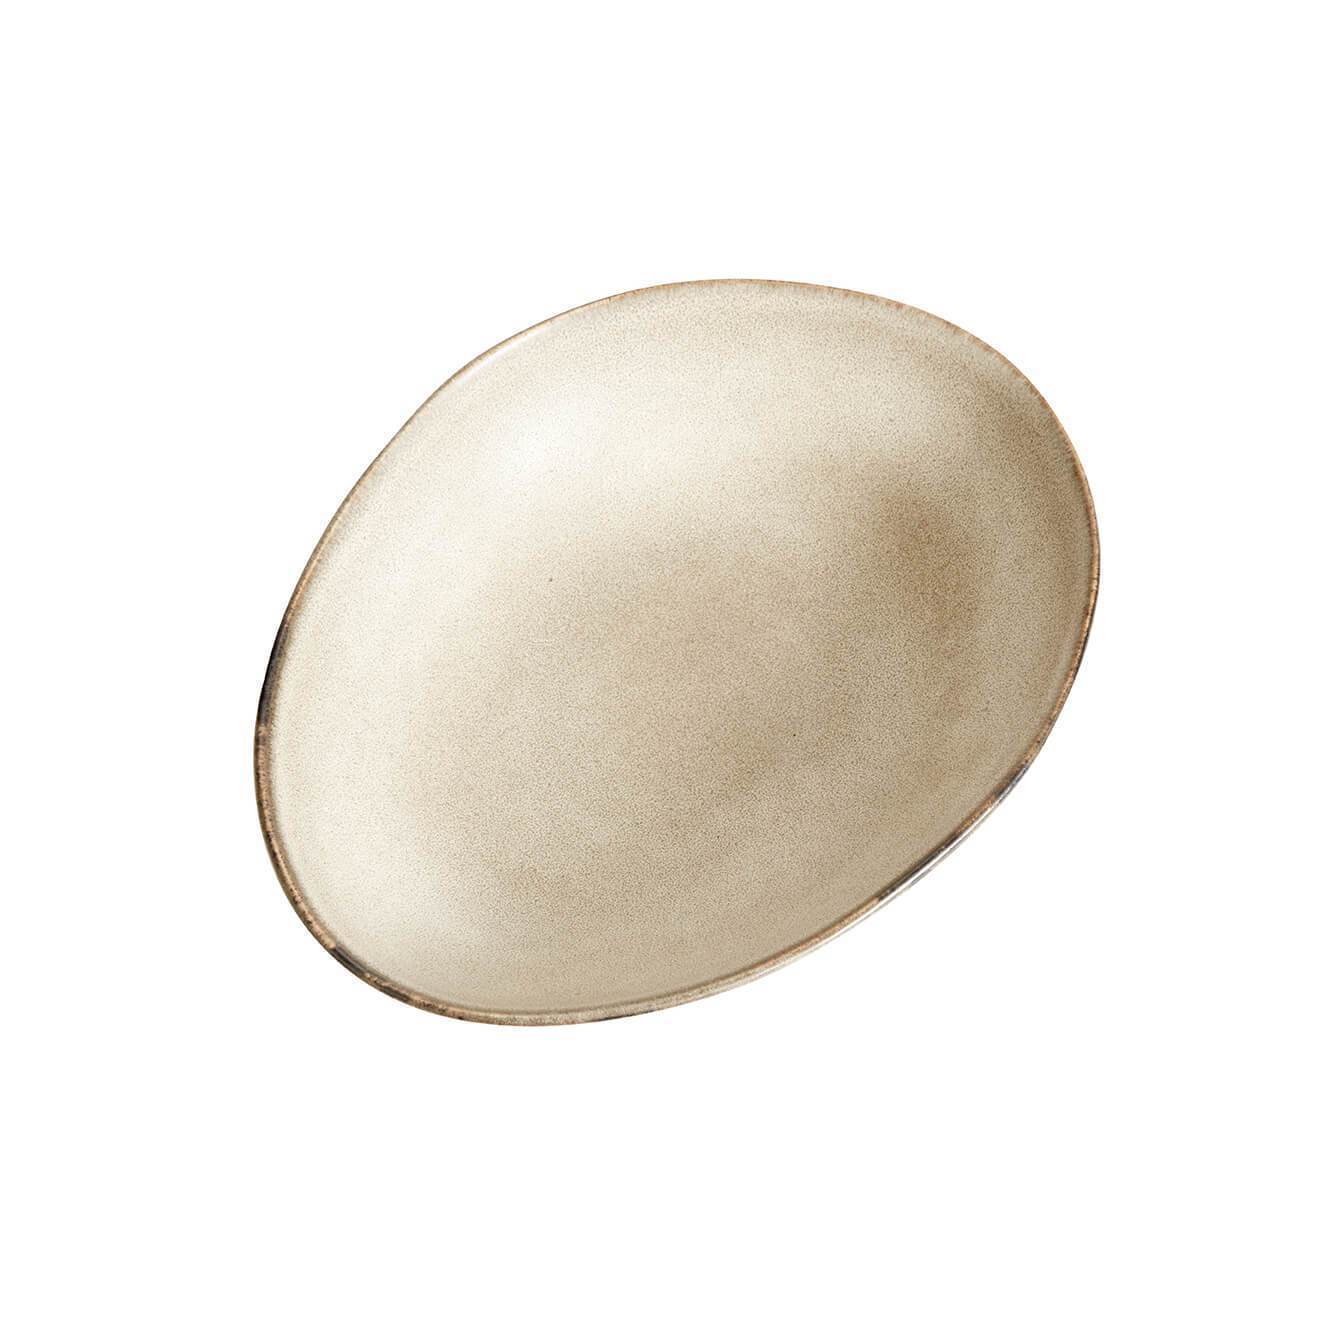 Muubs Mame Serving Bowl Oyster, 19cm